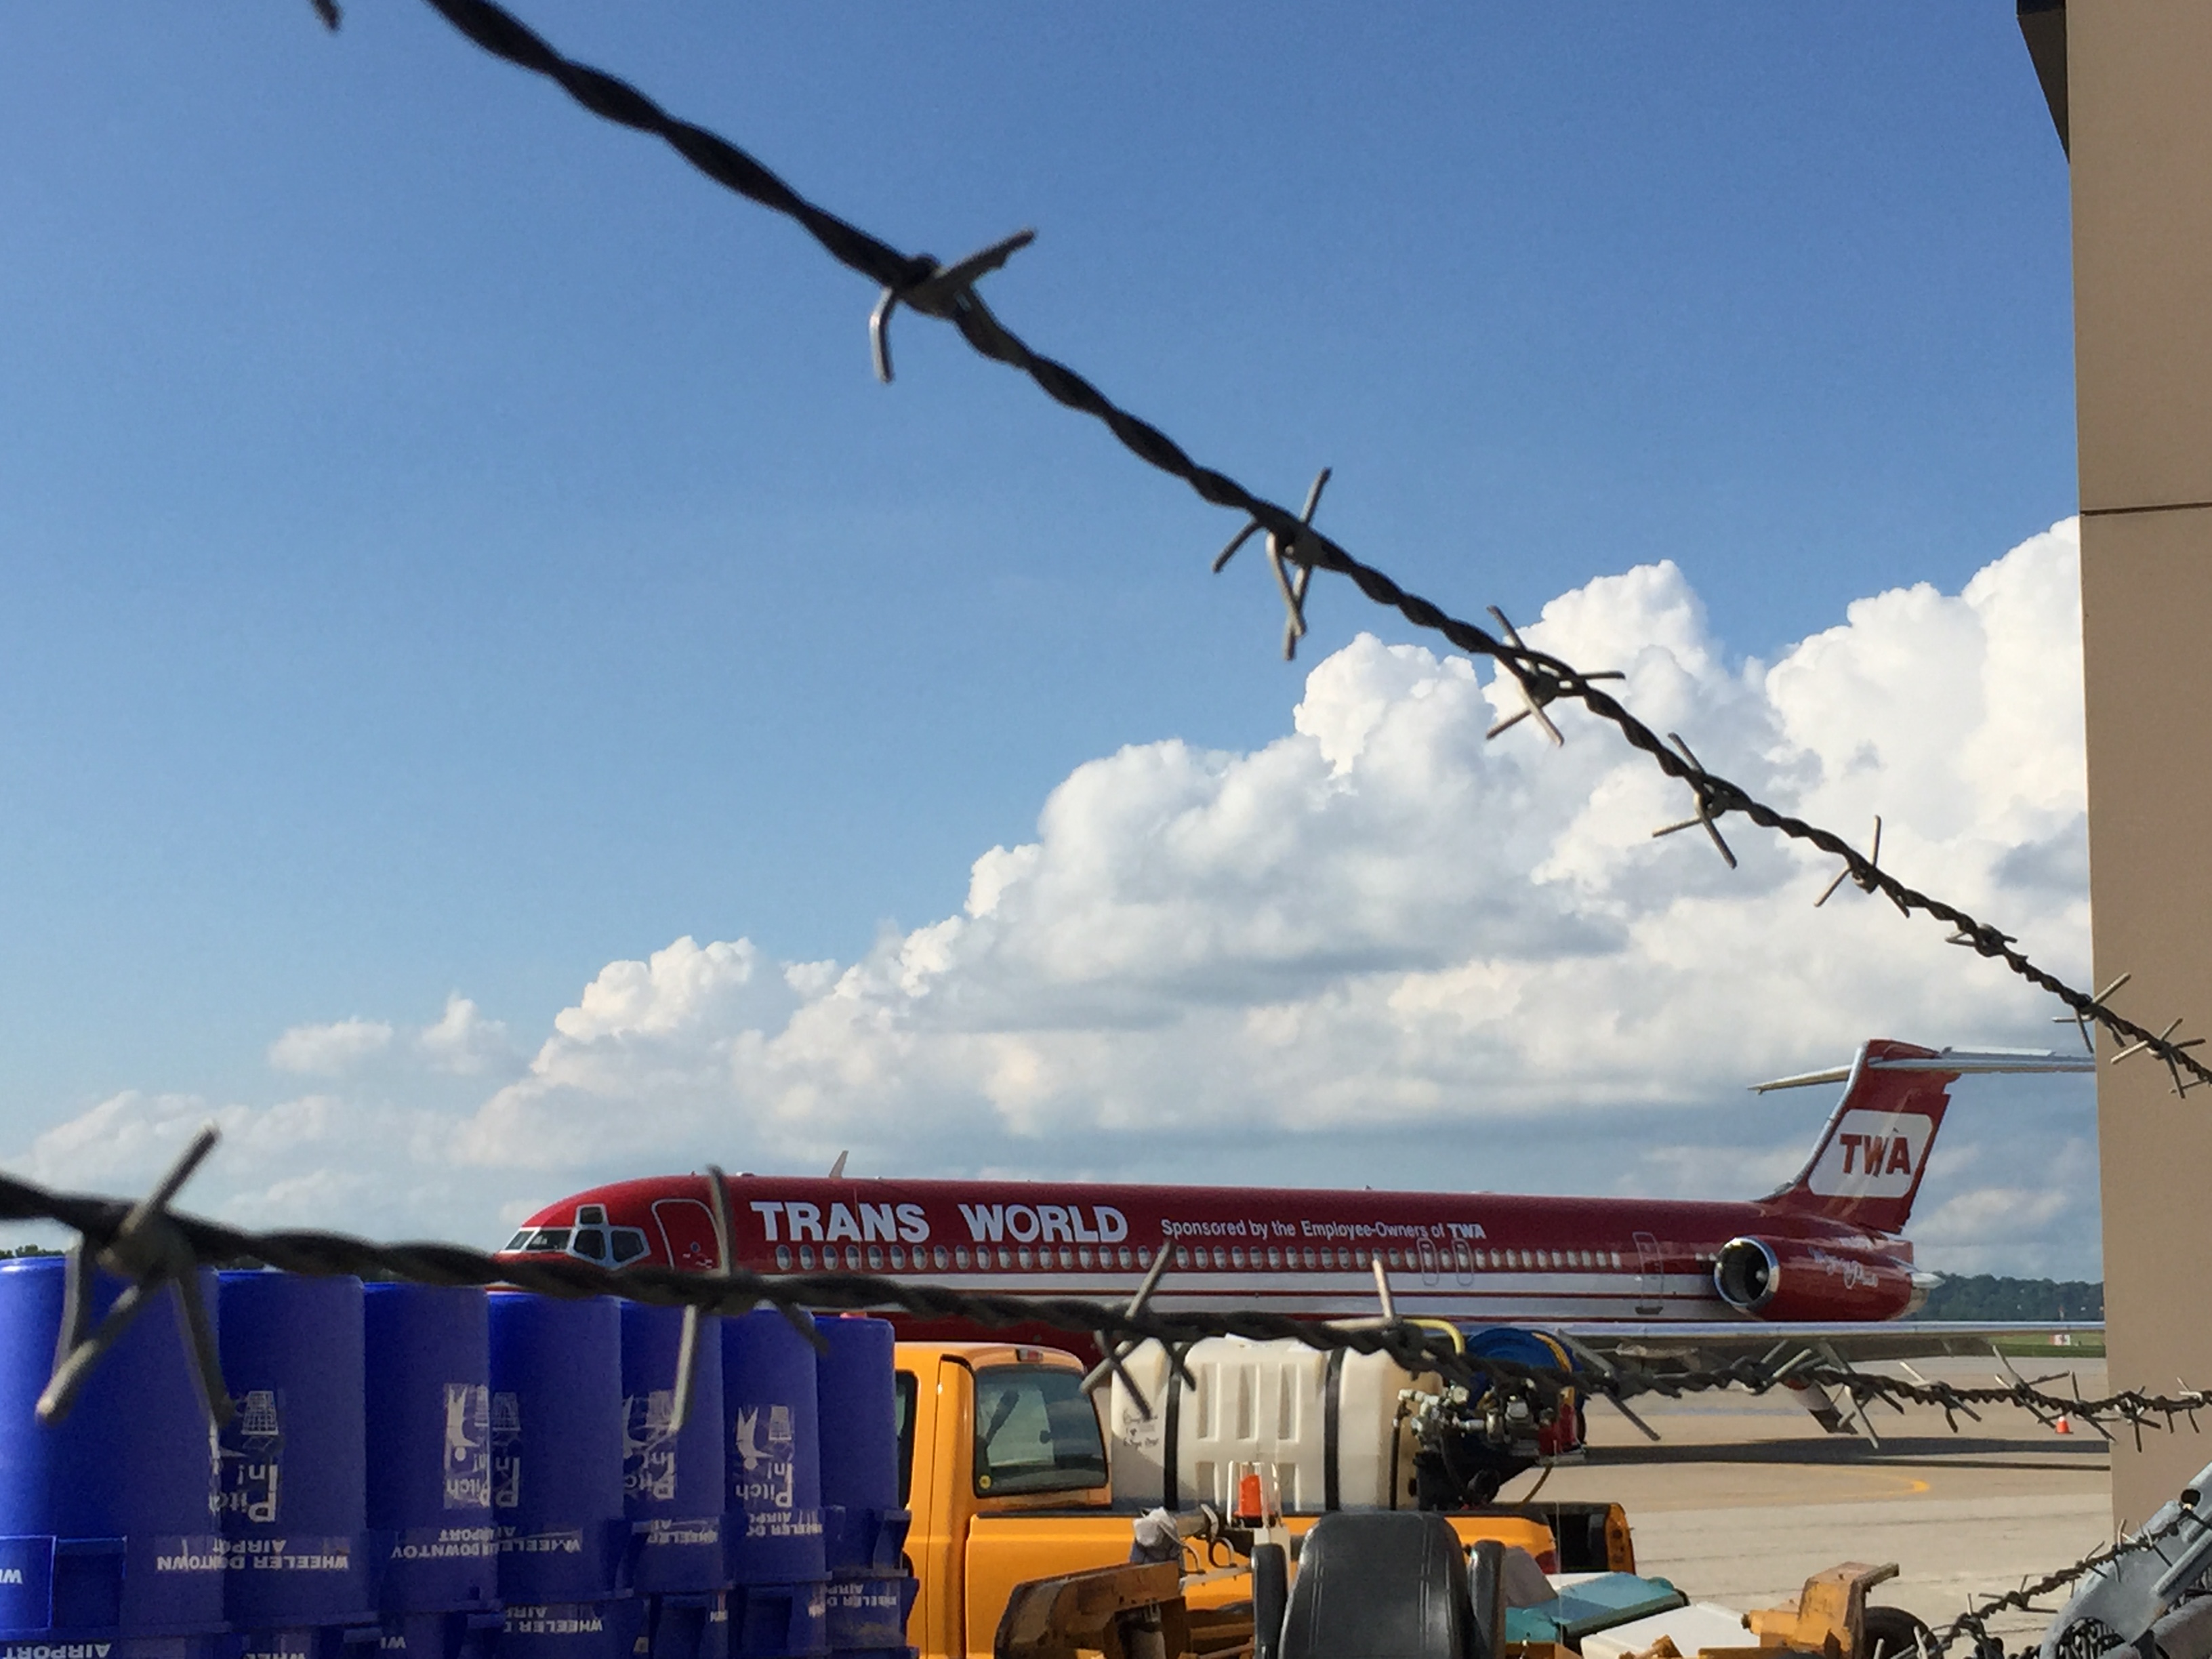 TWA Has Been Defunct For Almost 15 Years, But A Lawsuit Lives On….